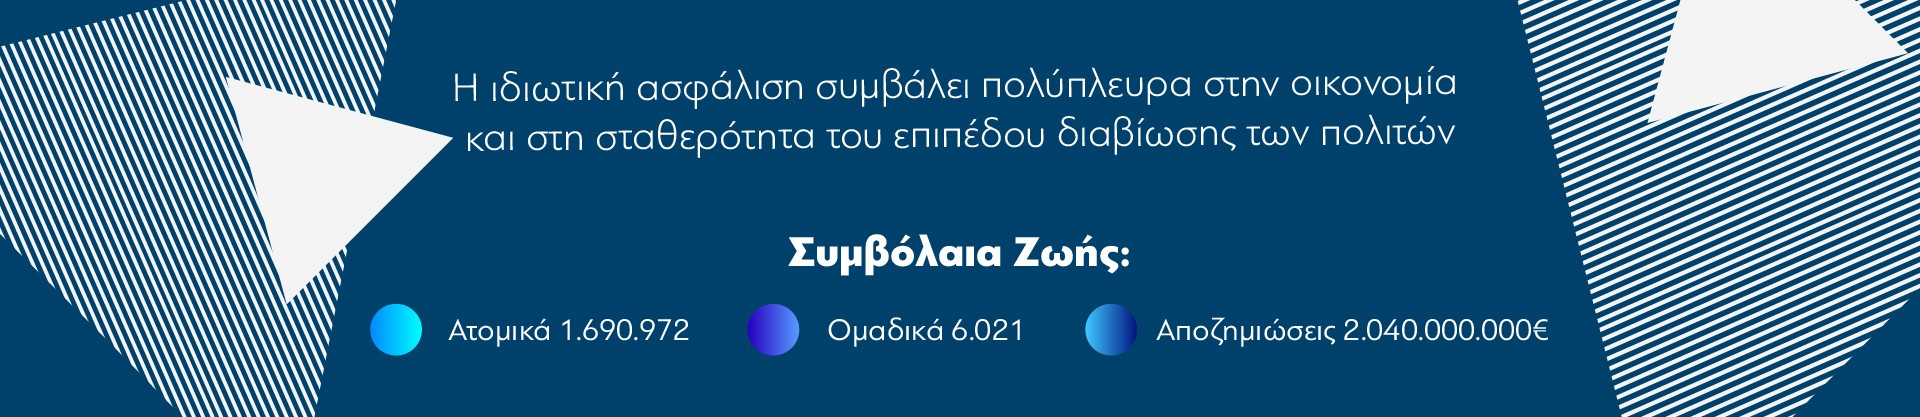 https://www.anax.gr/wp-content/uploads/2020/03/ΑΝΑΧ-asfaleia-zois.jpg